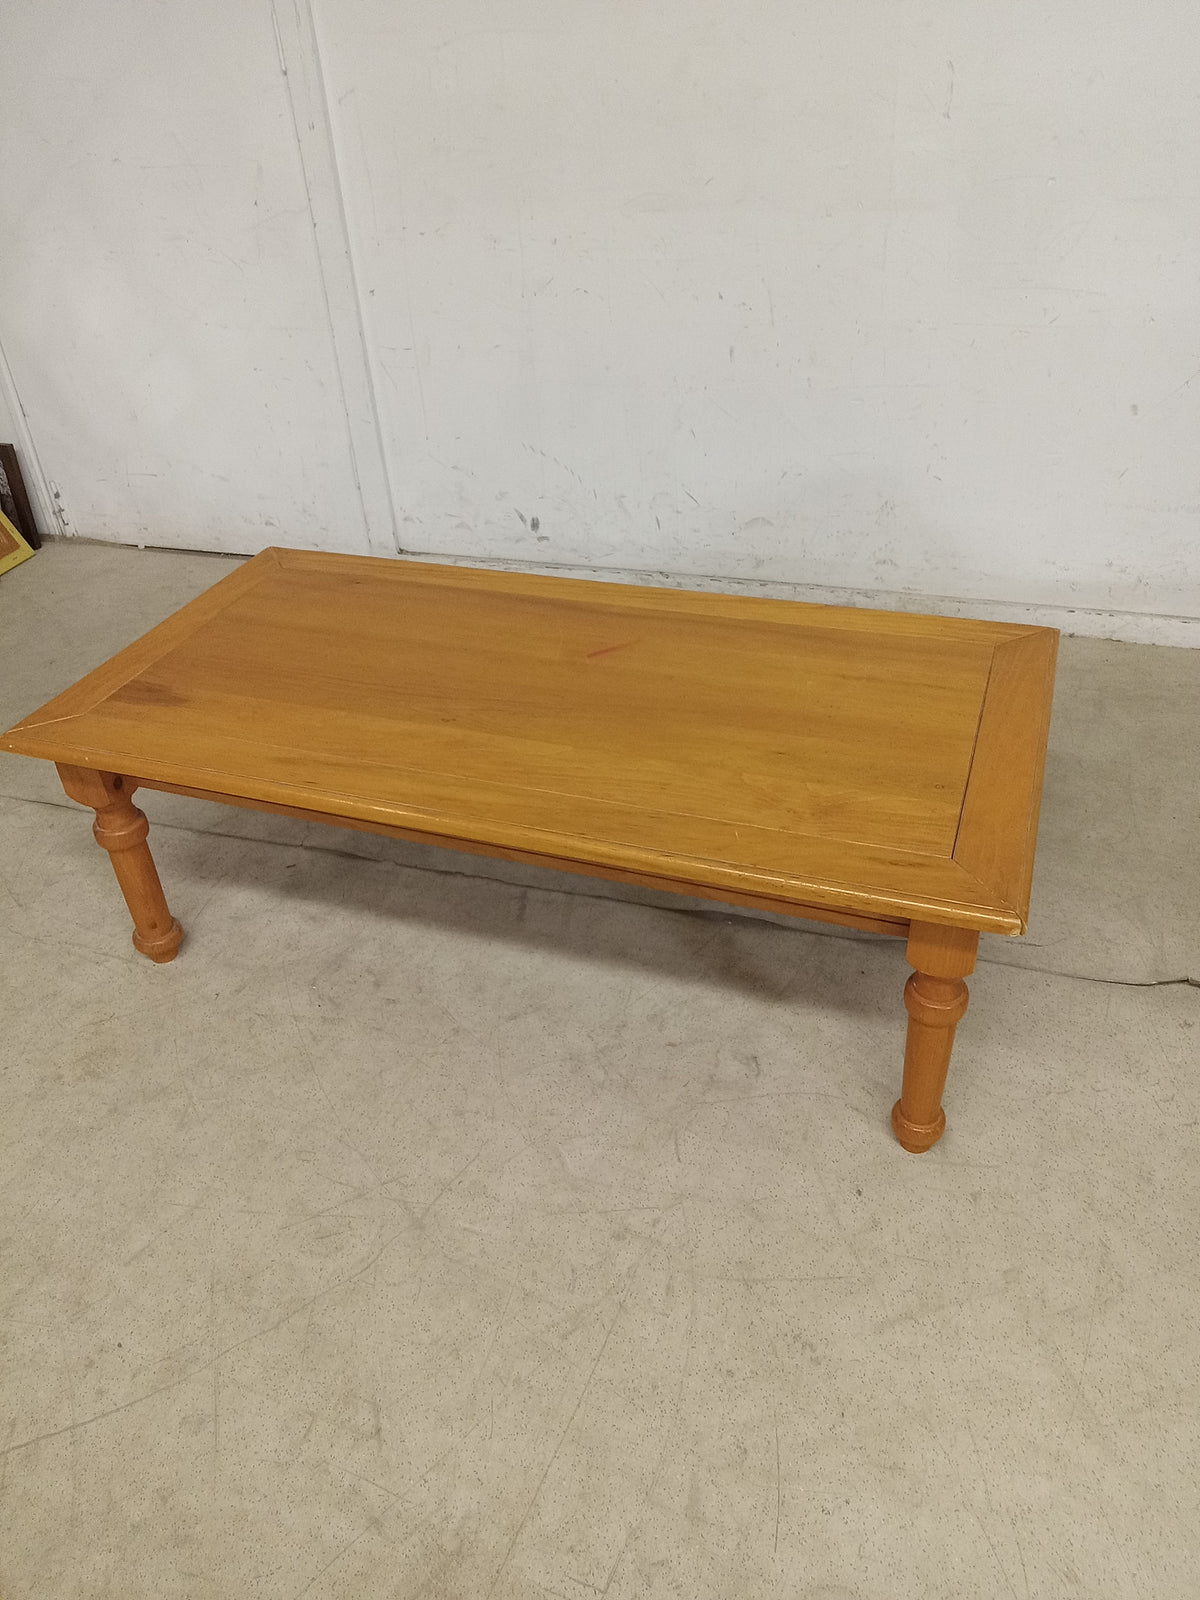 48"W Wooden Coffee Table